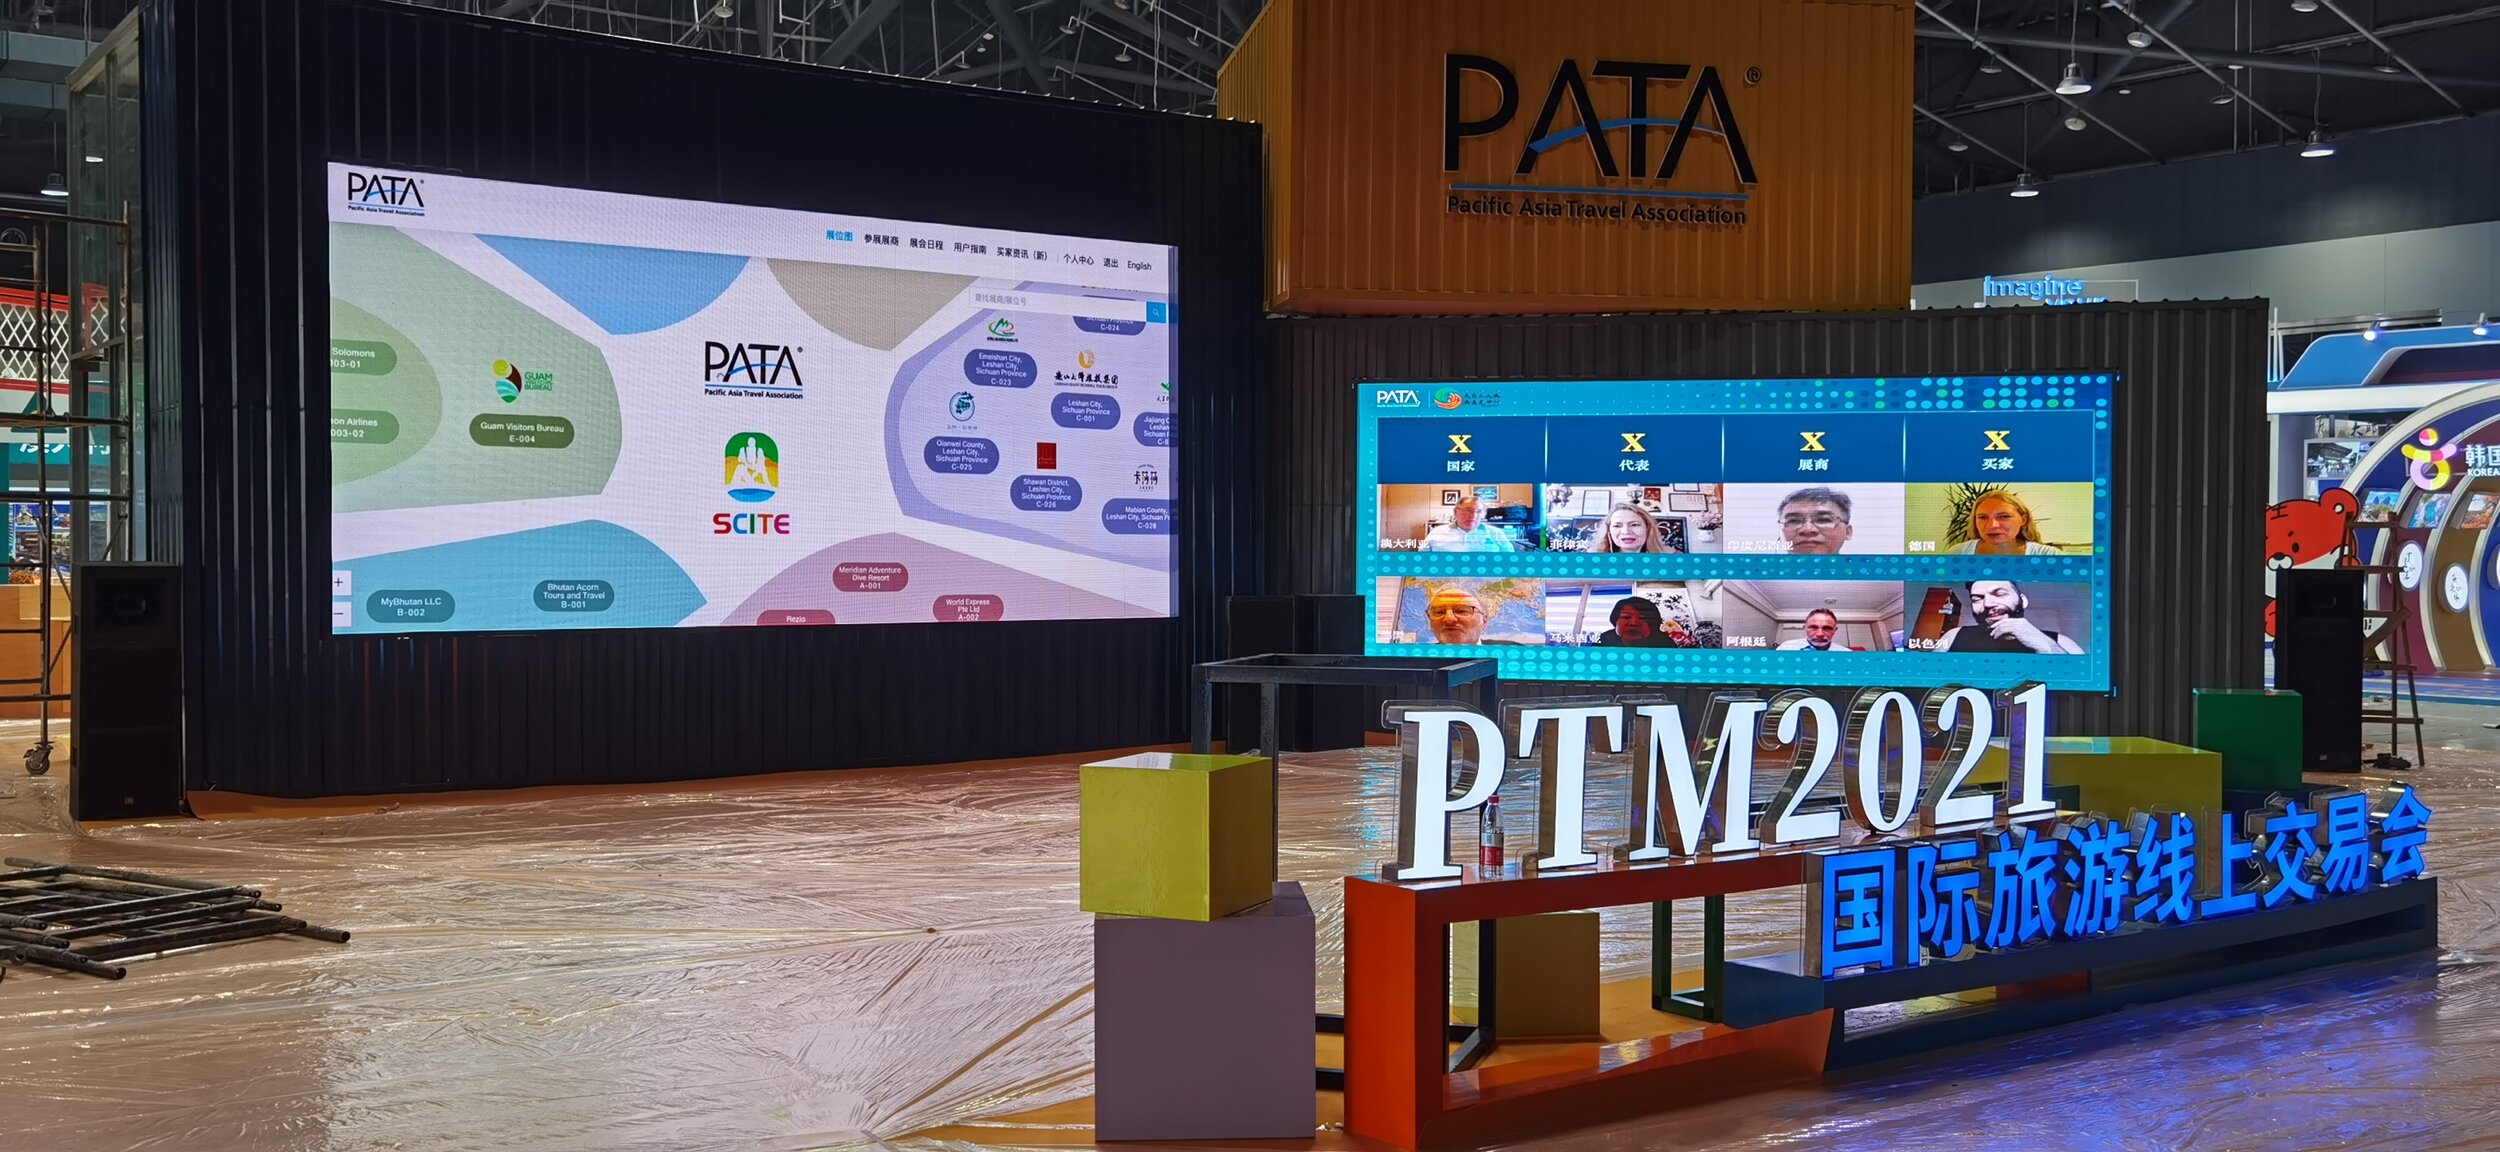 The PATA Travel Mart 2021 booth at the Sichuan International Travel Expo (SCITE) in Leshan, China